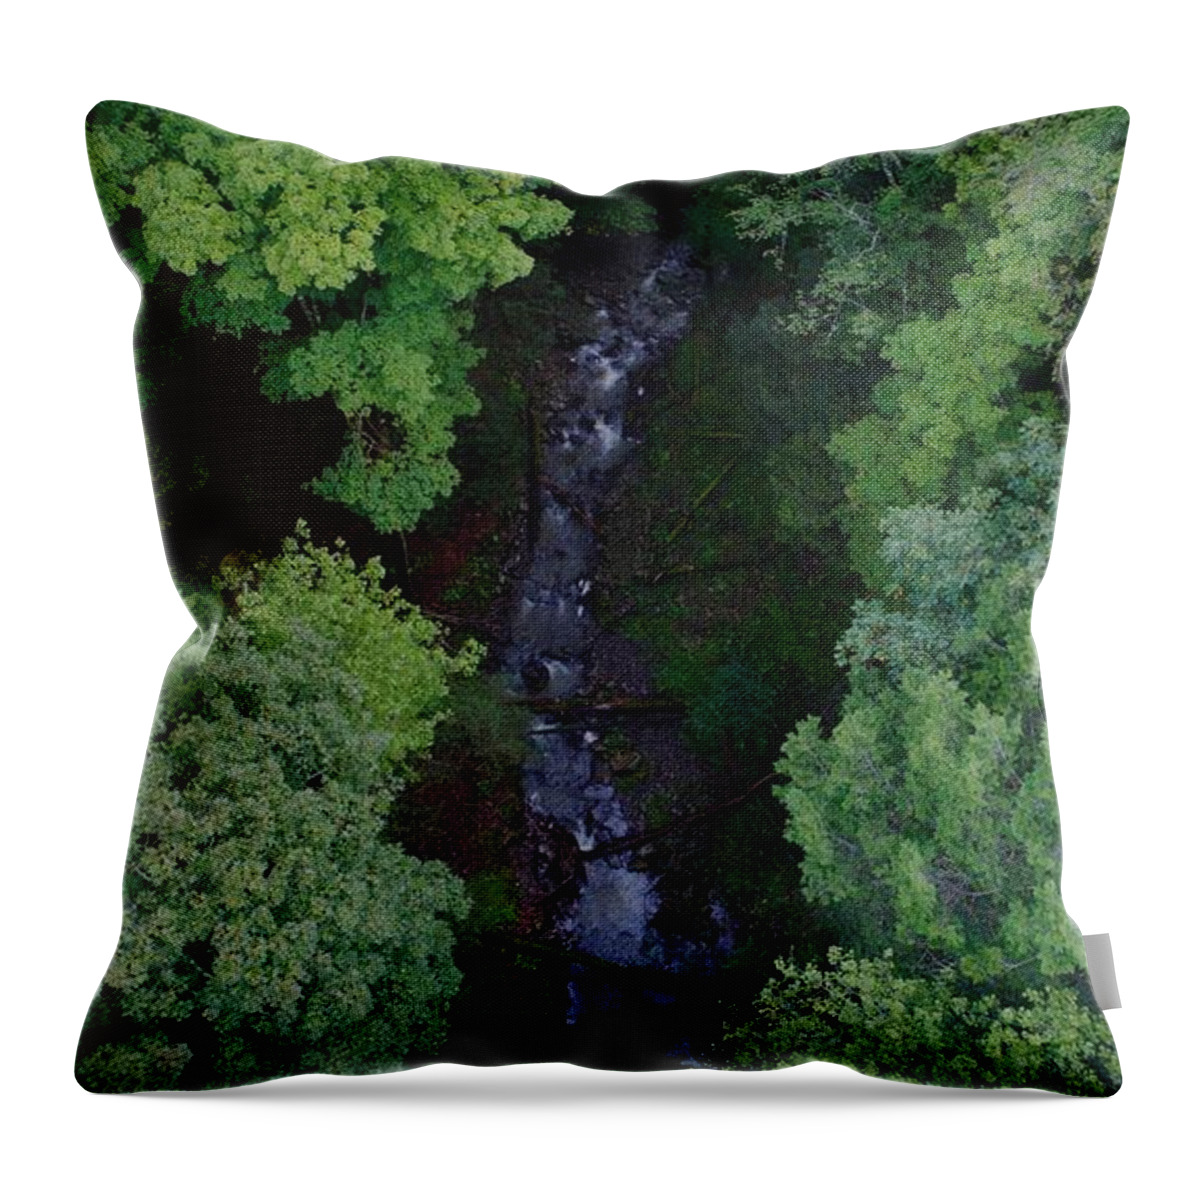 Will Run Creek Throw Pillow featuring the photograph Willow Run Creek by Anthony Giammarino